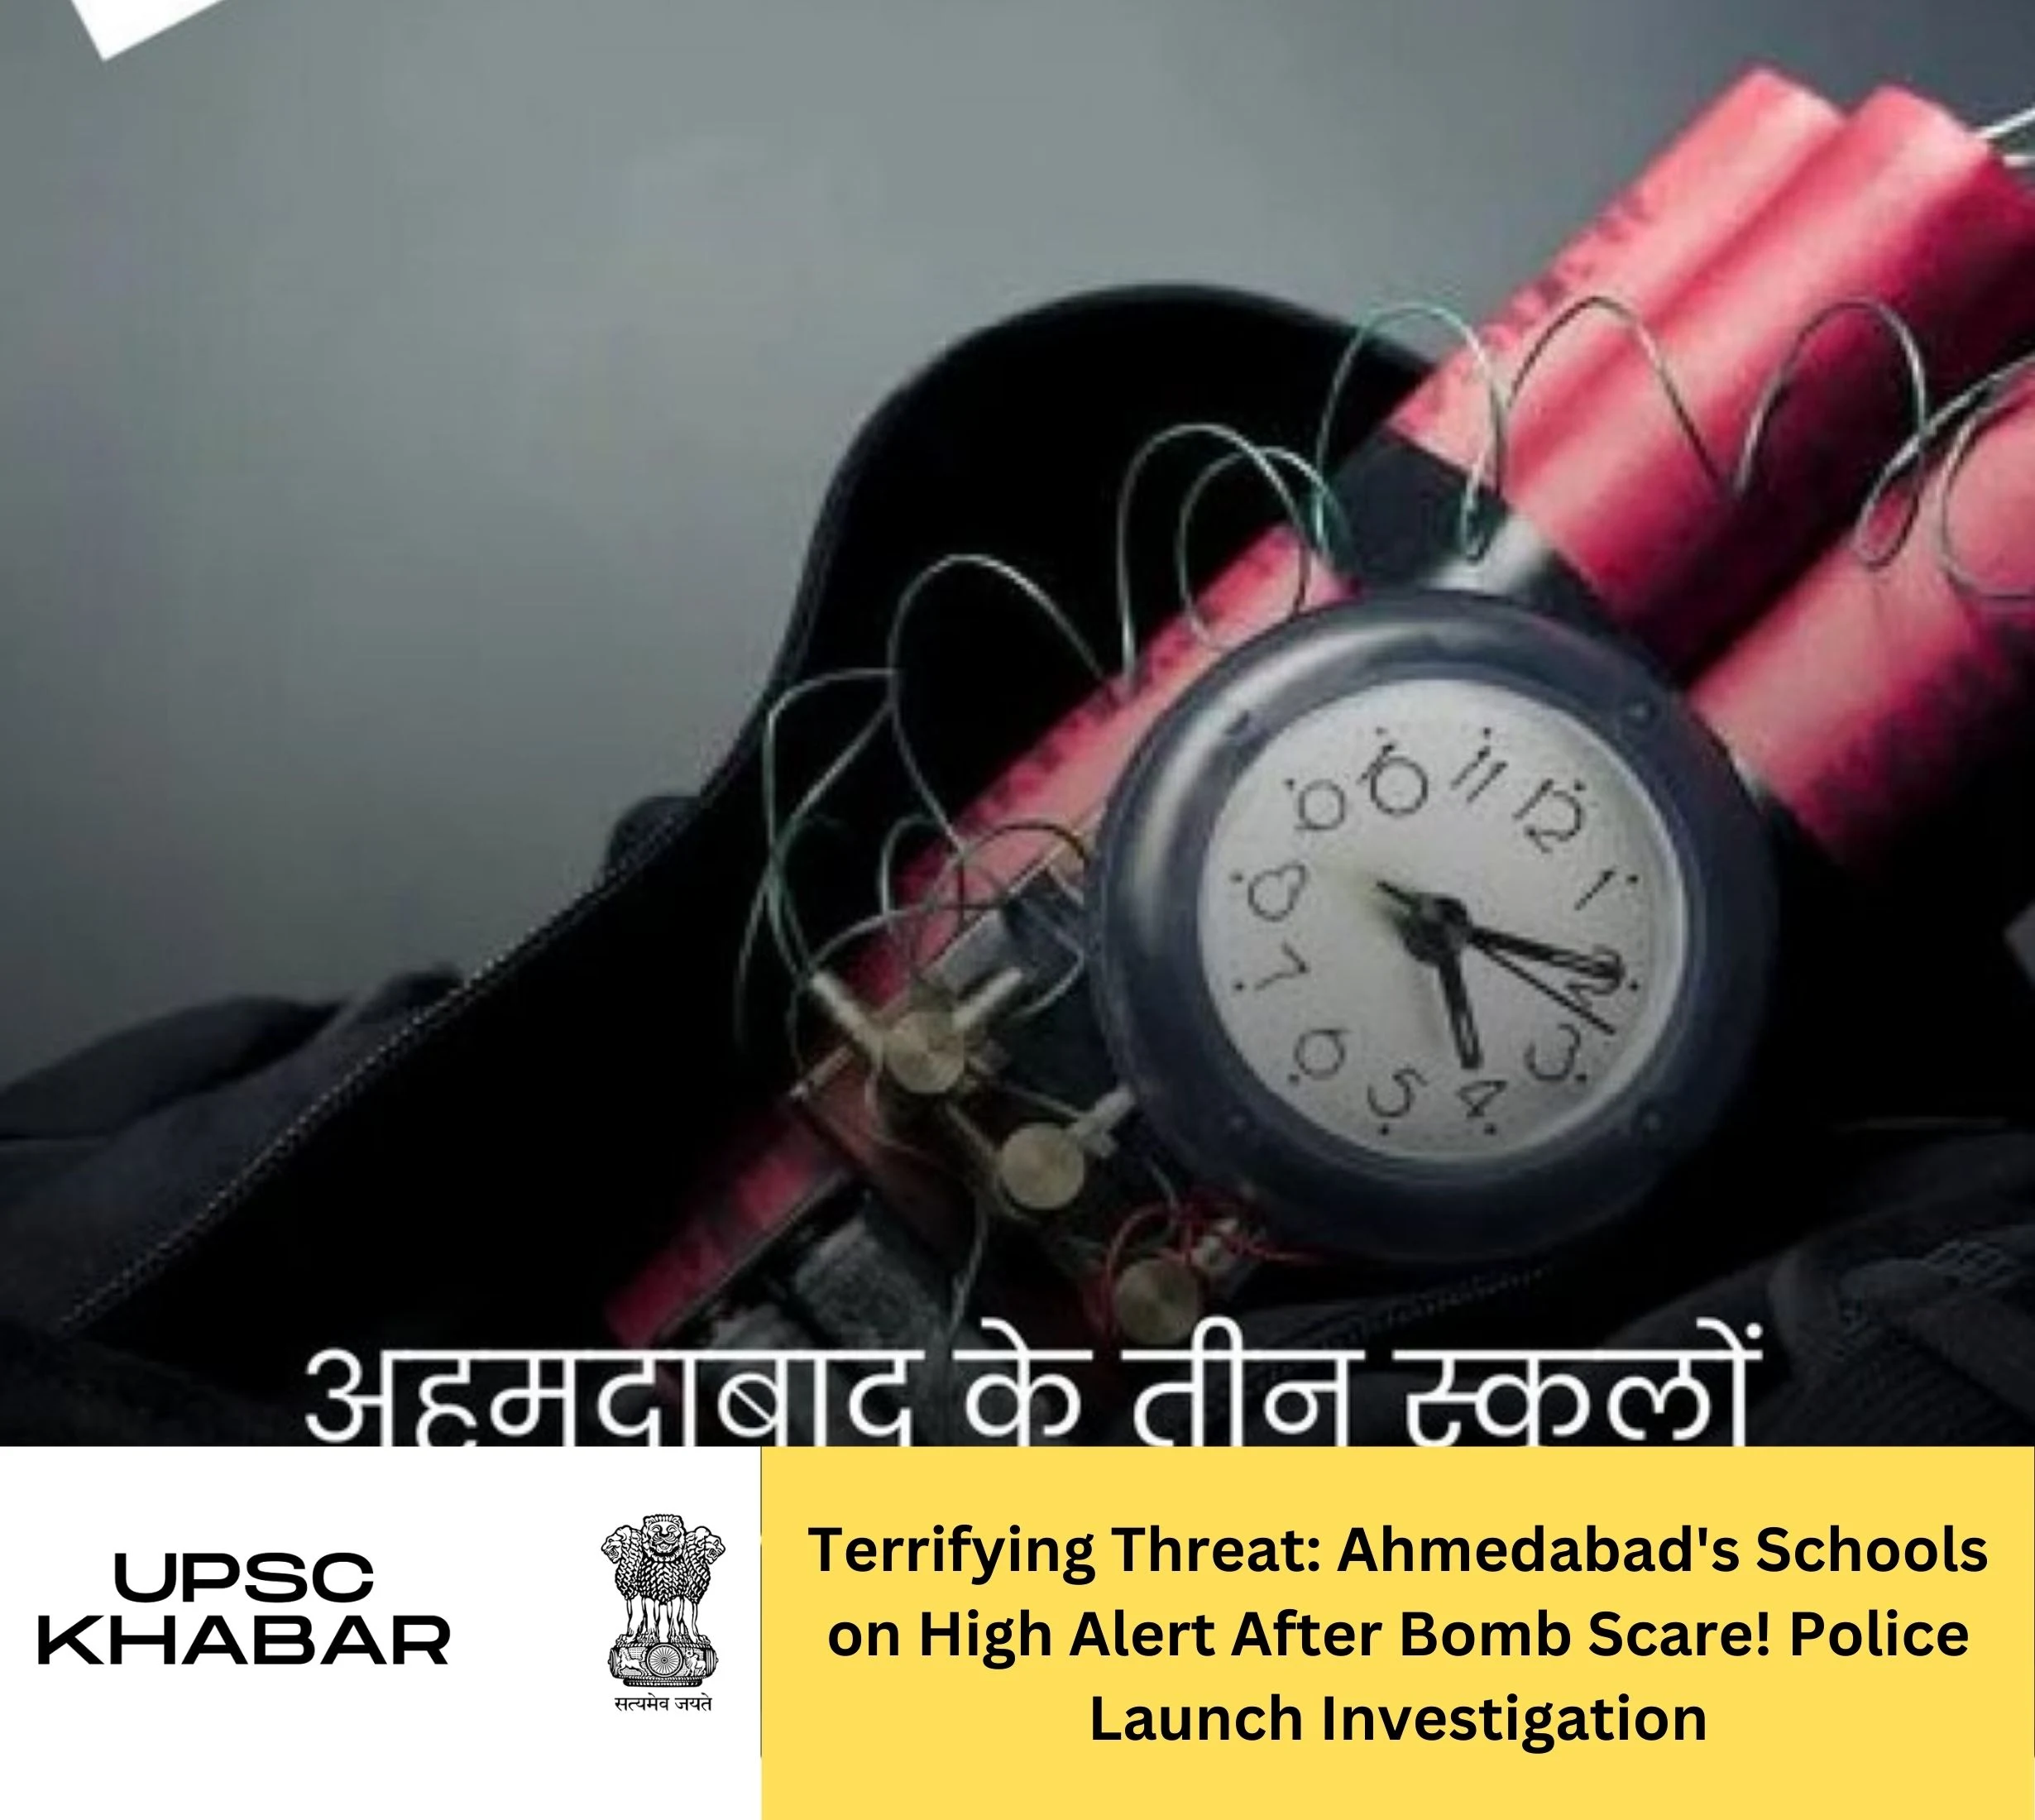 Terrifying Threat: Ahmedabad's Schools on High Alert After Bomb Scare! Police Launch Investigation